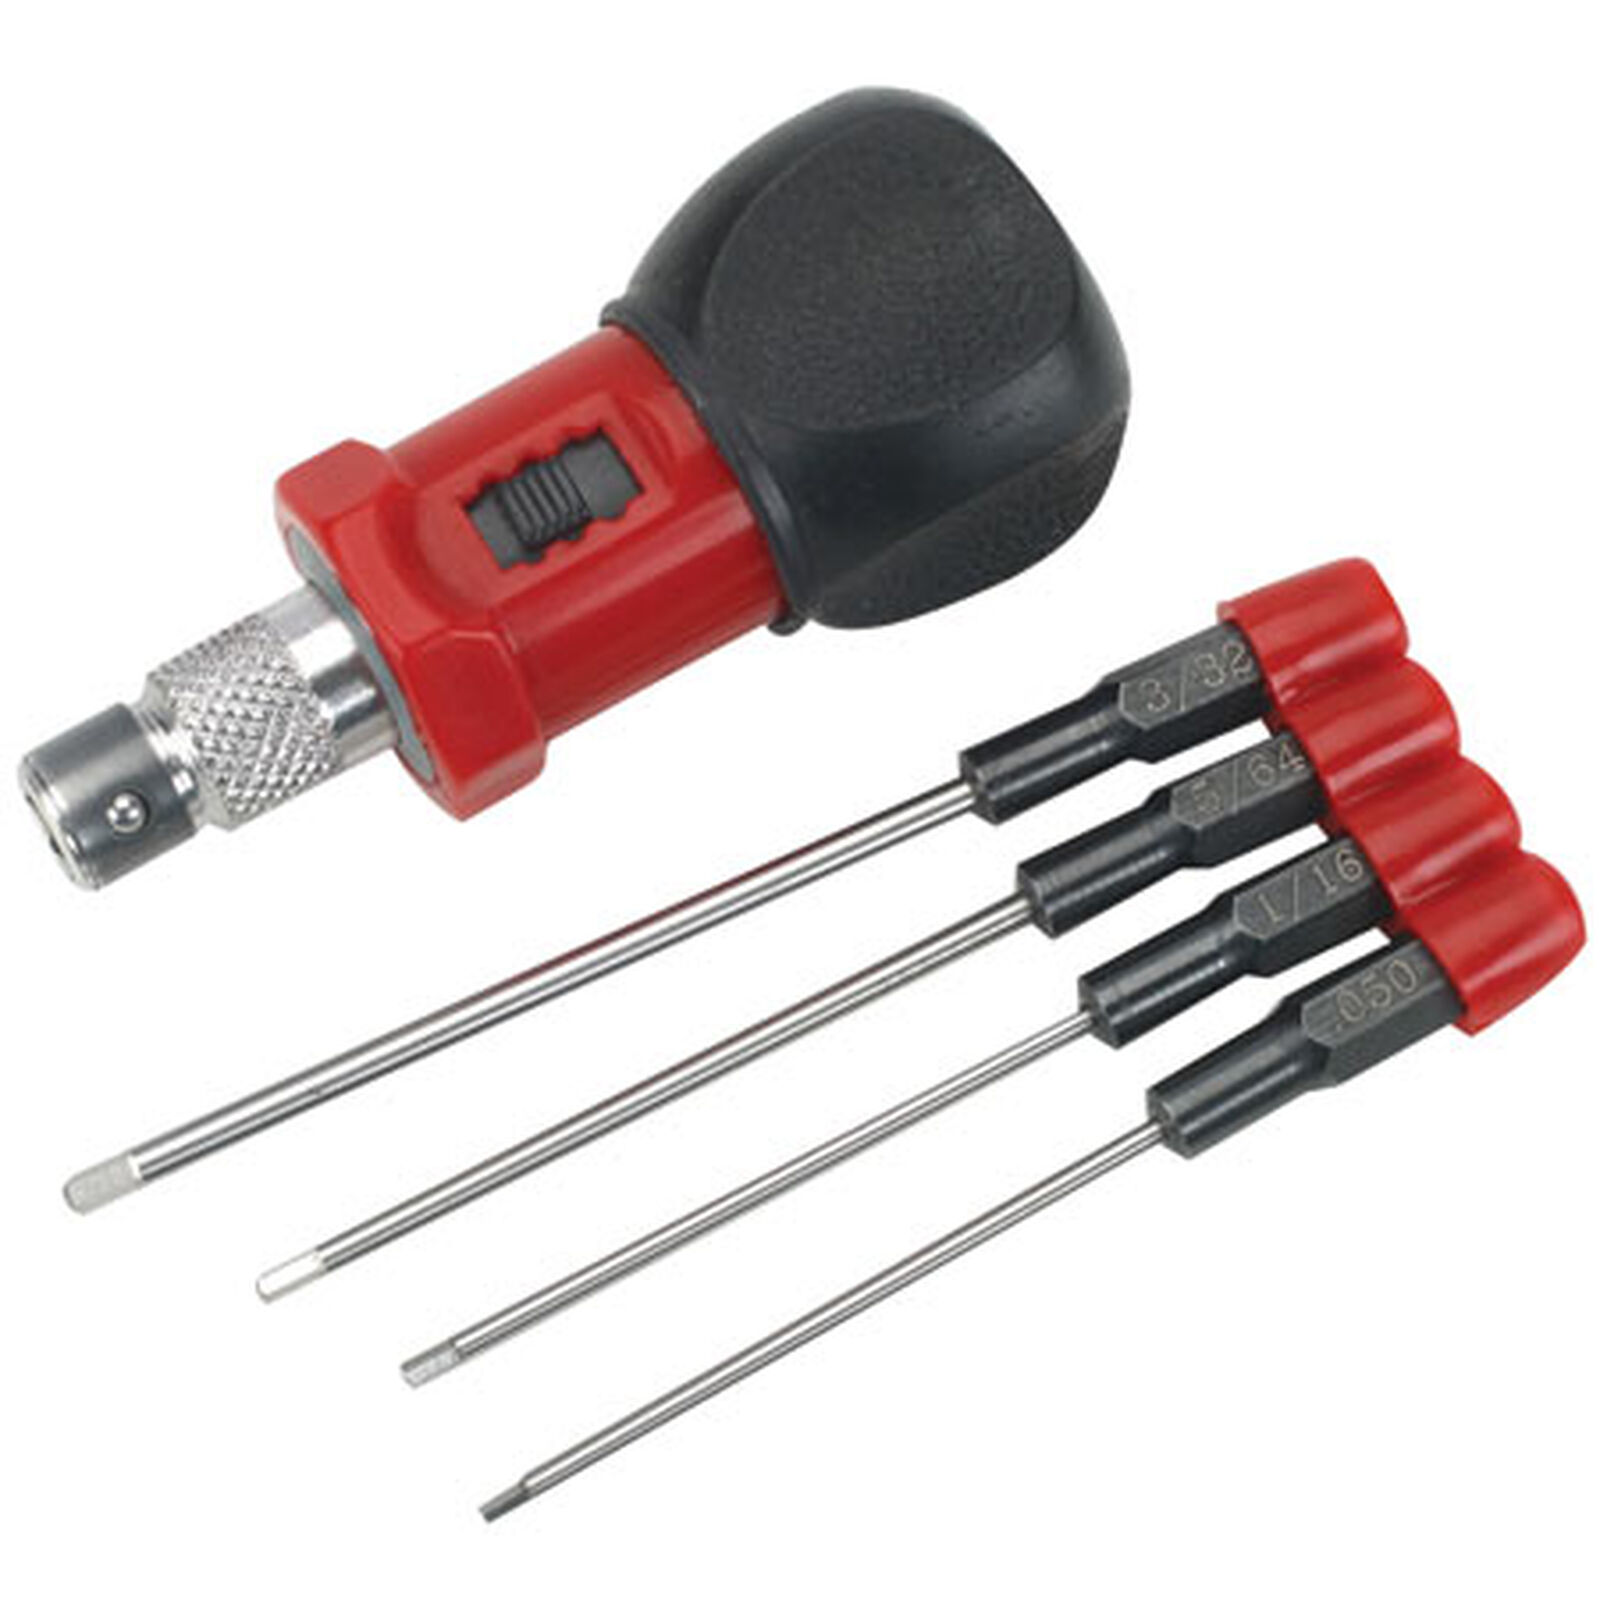 4-Piece Standard Hex Wrench Set with Handle